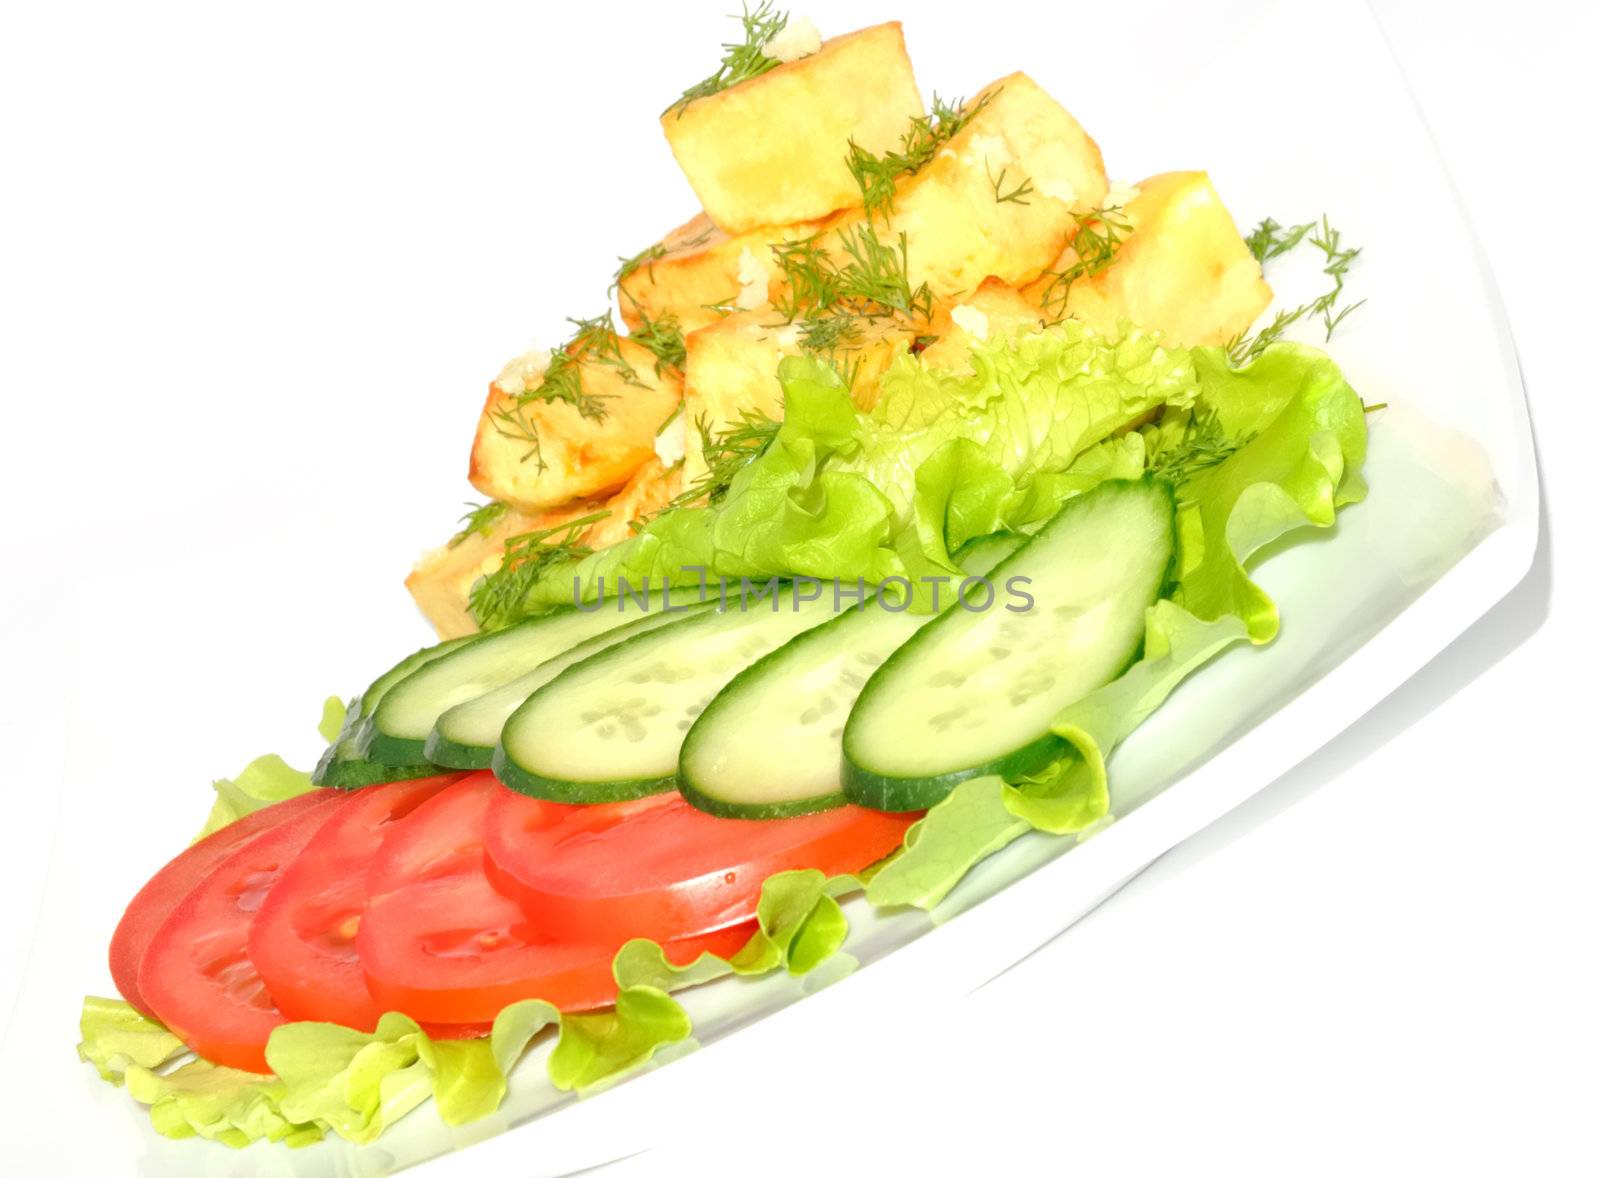 Potato country style with dill and garlic, fresh vegetables on white background